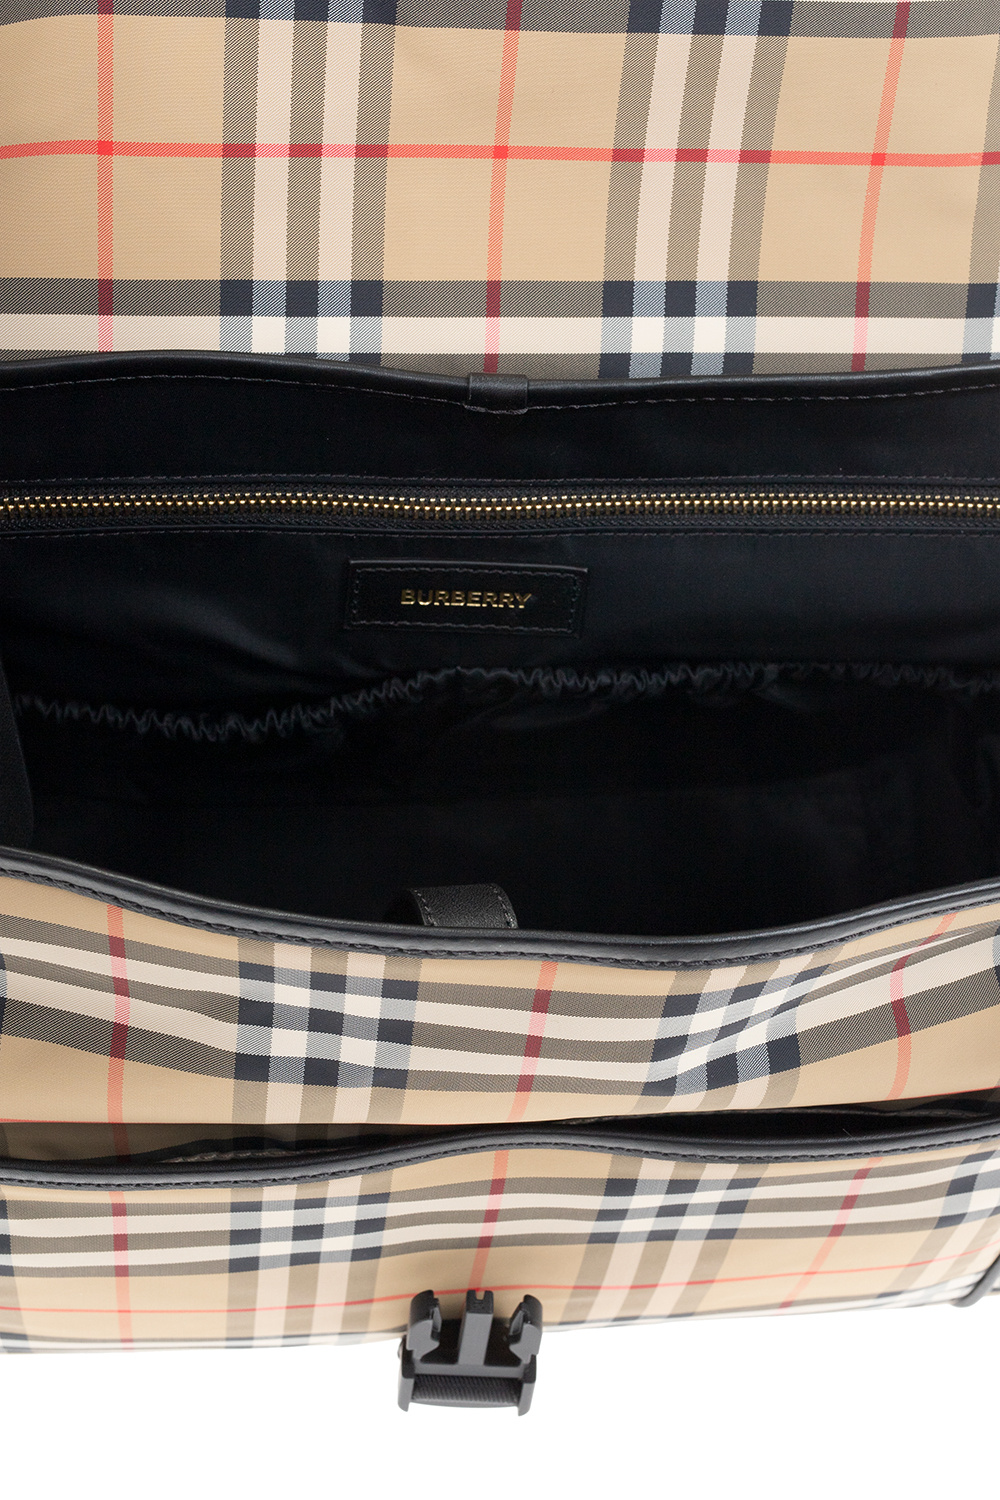 Burberry Black/Beige Housecheck Canvas and Leather Square Logo Buckle Belt  85CM